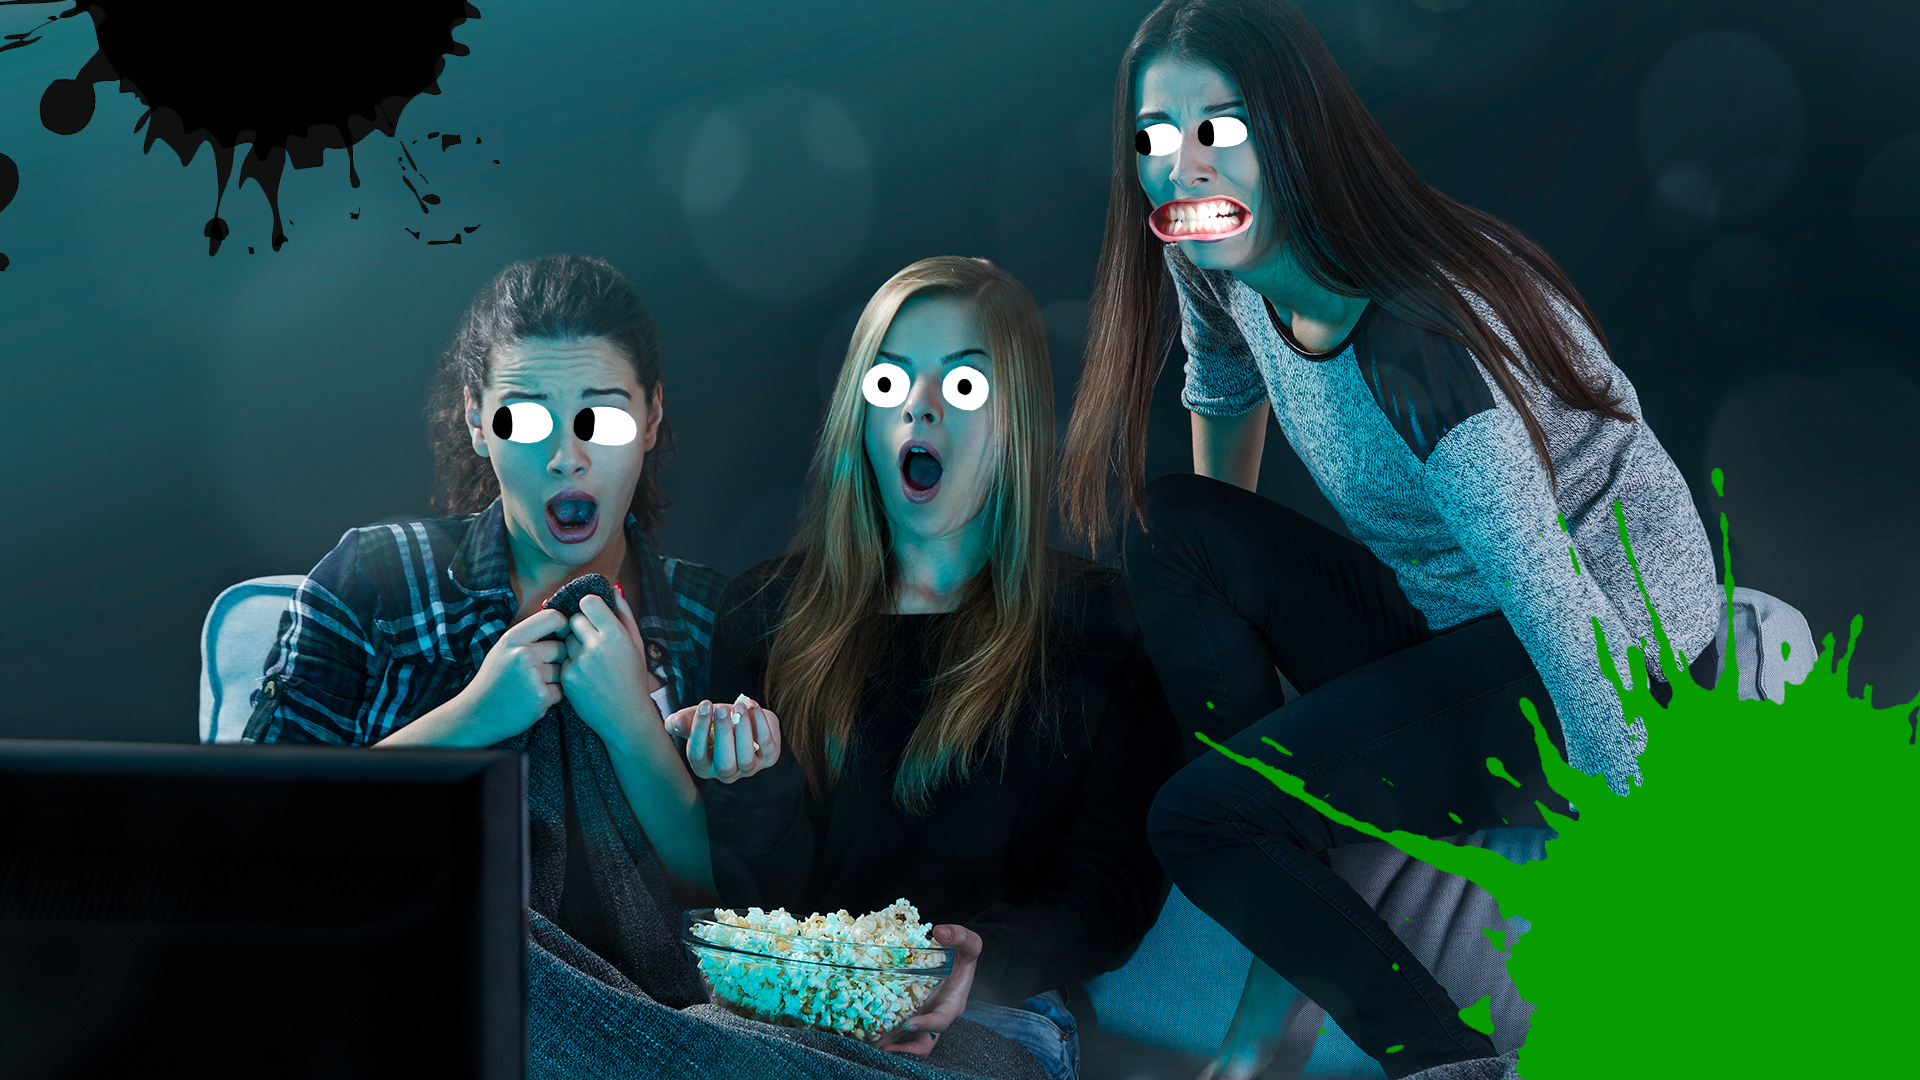 3 women watching a scary movie